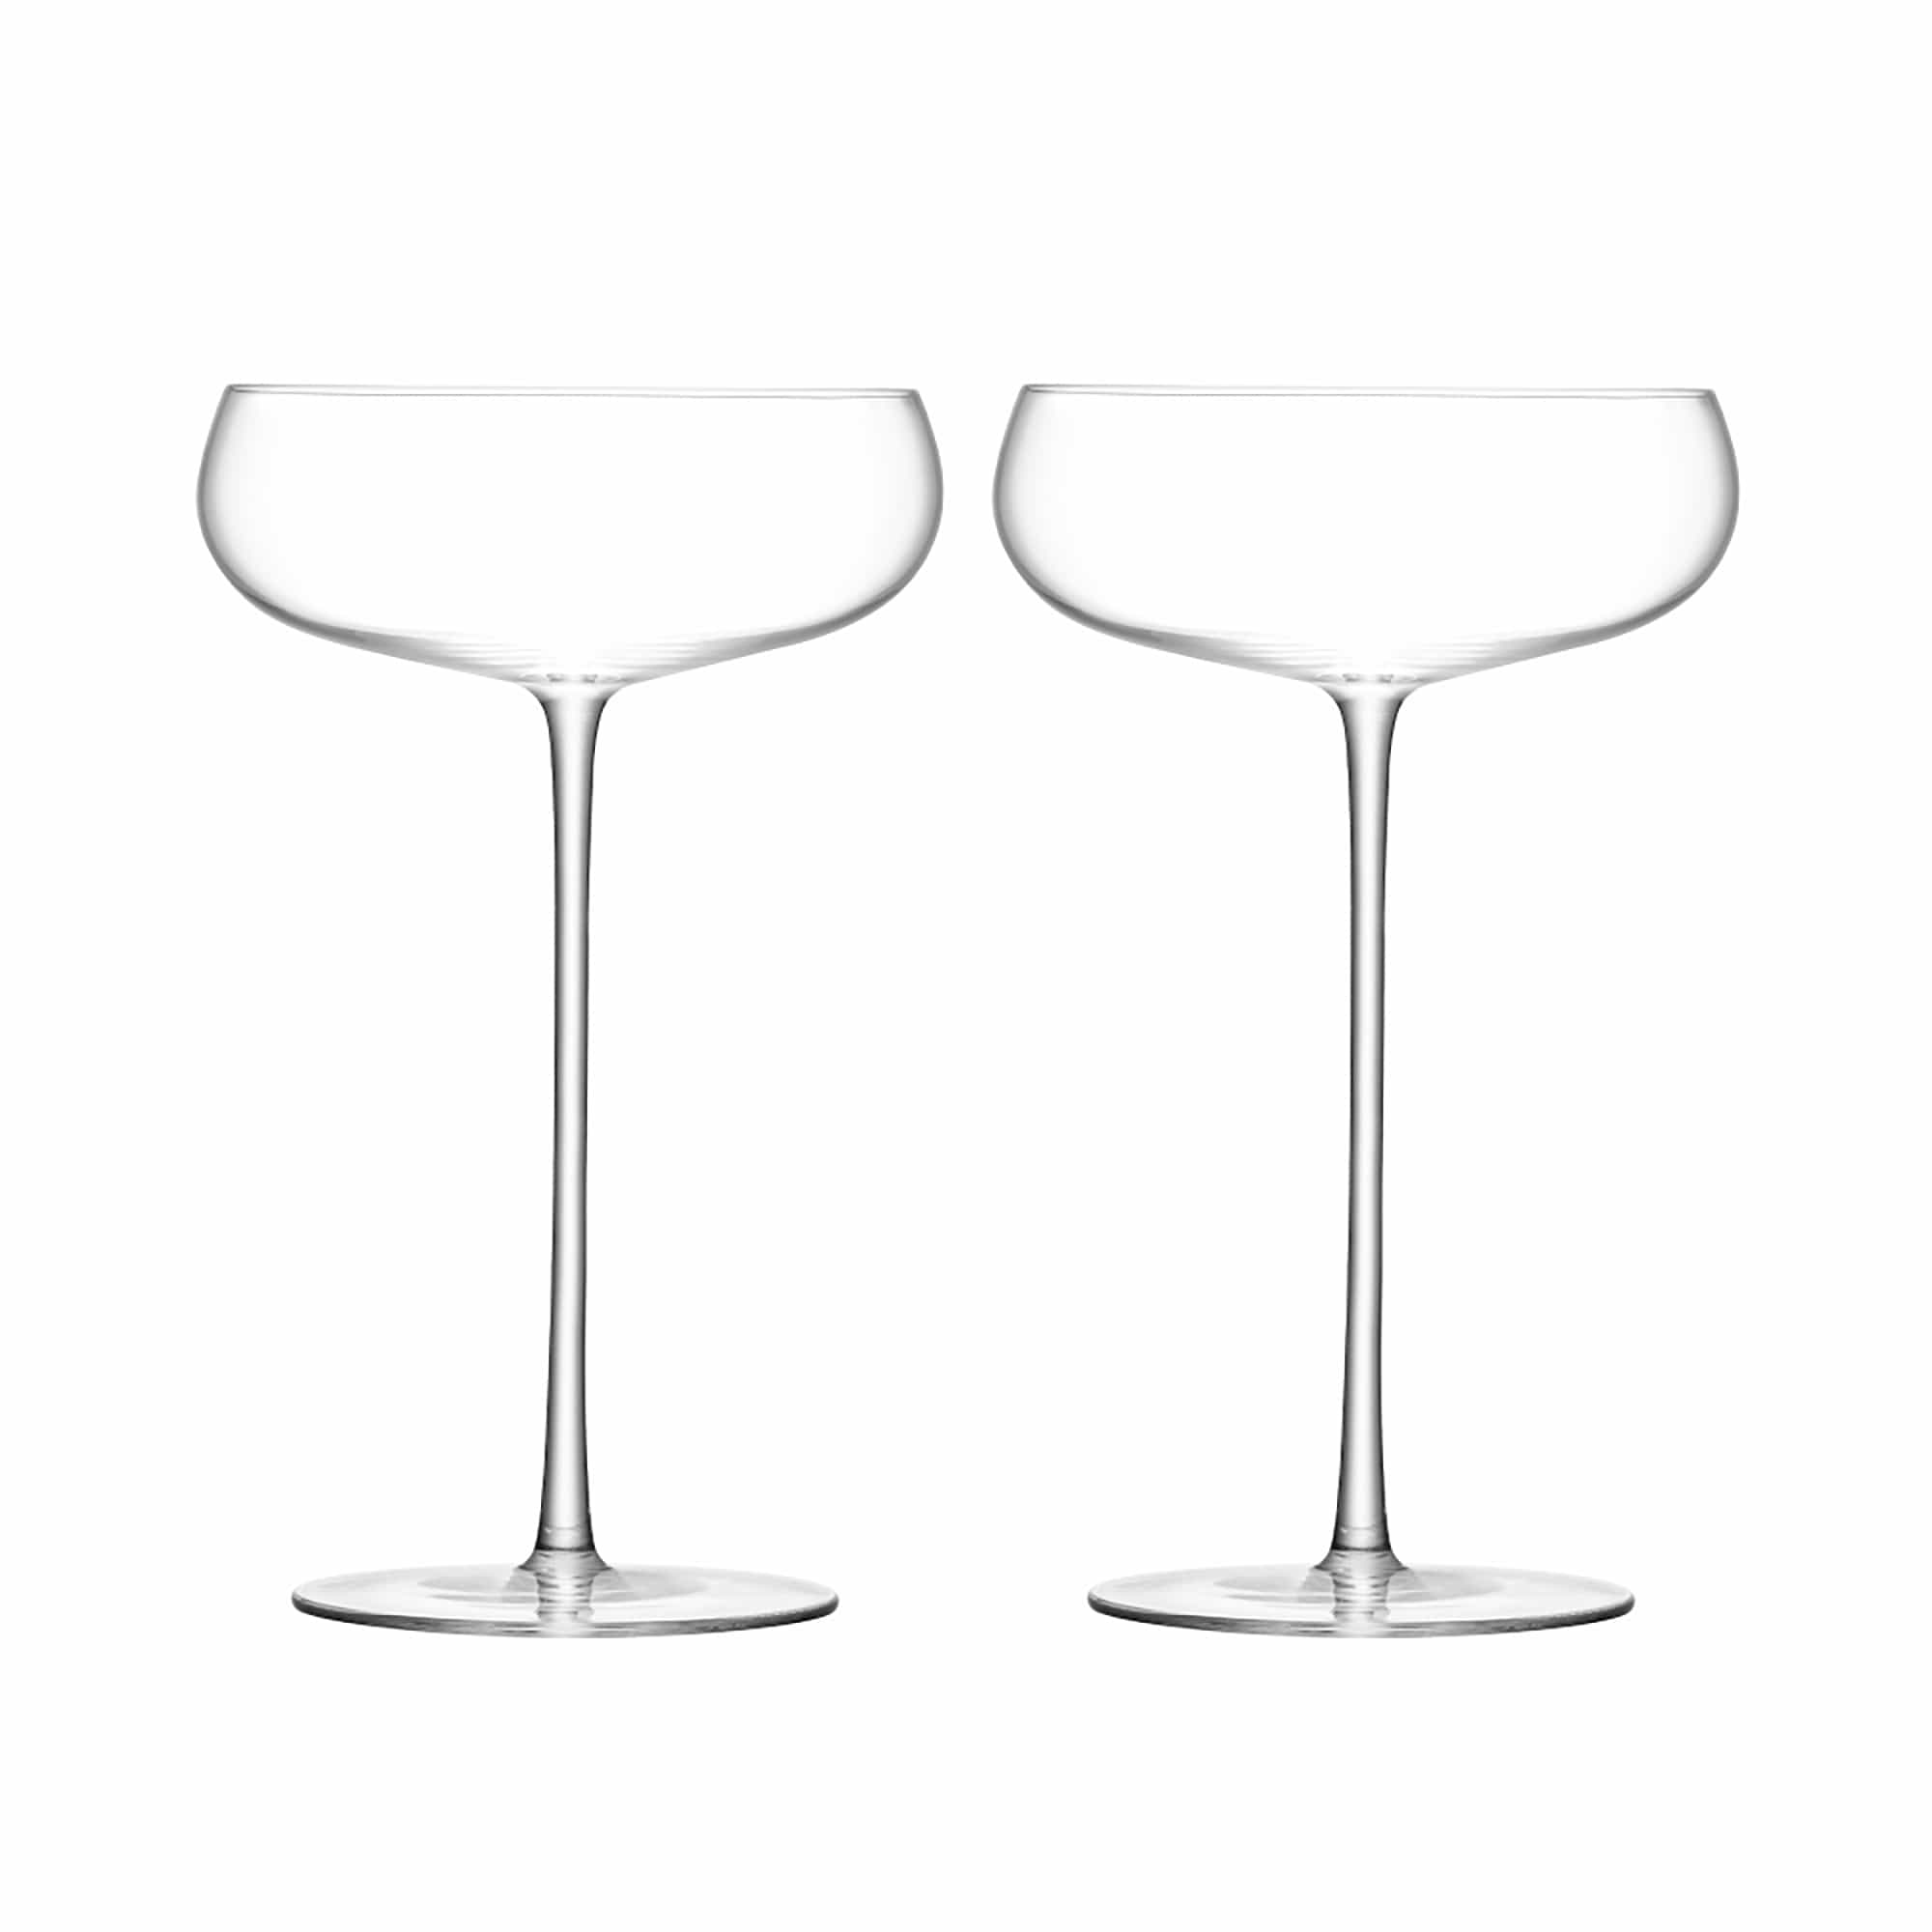 Wine Culture Champagne Saucer - Set of 2 